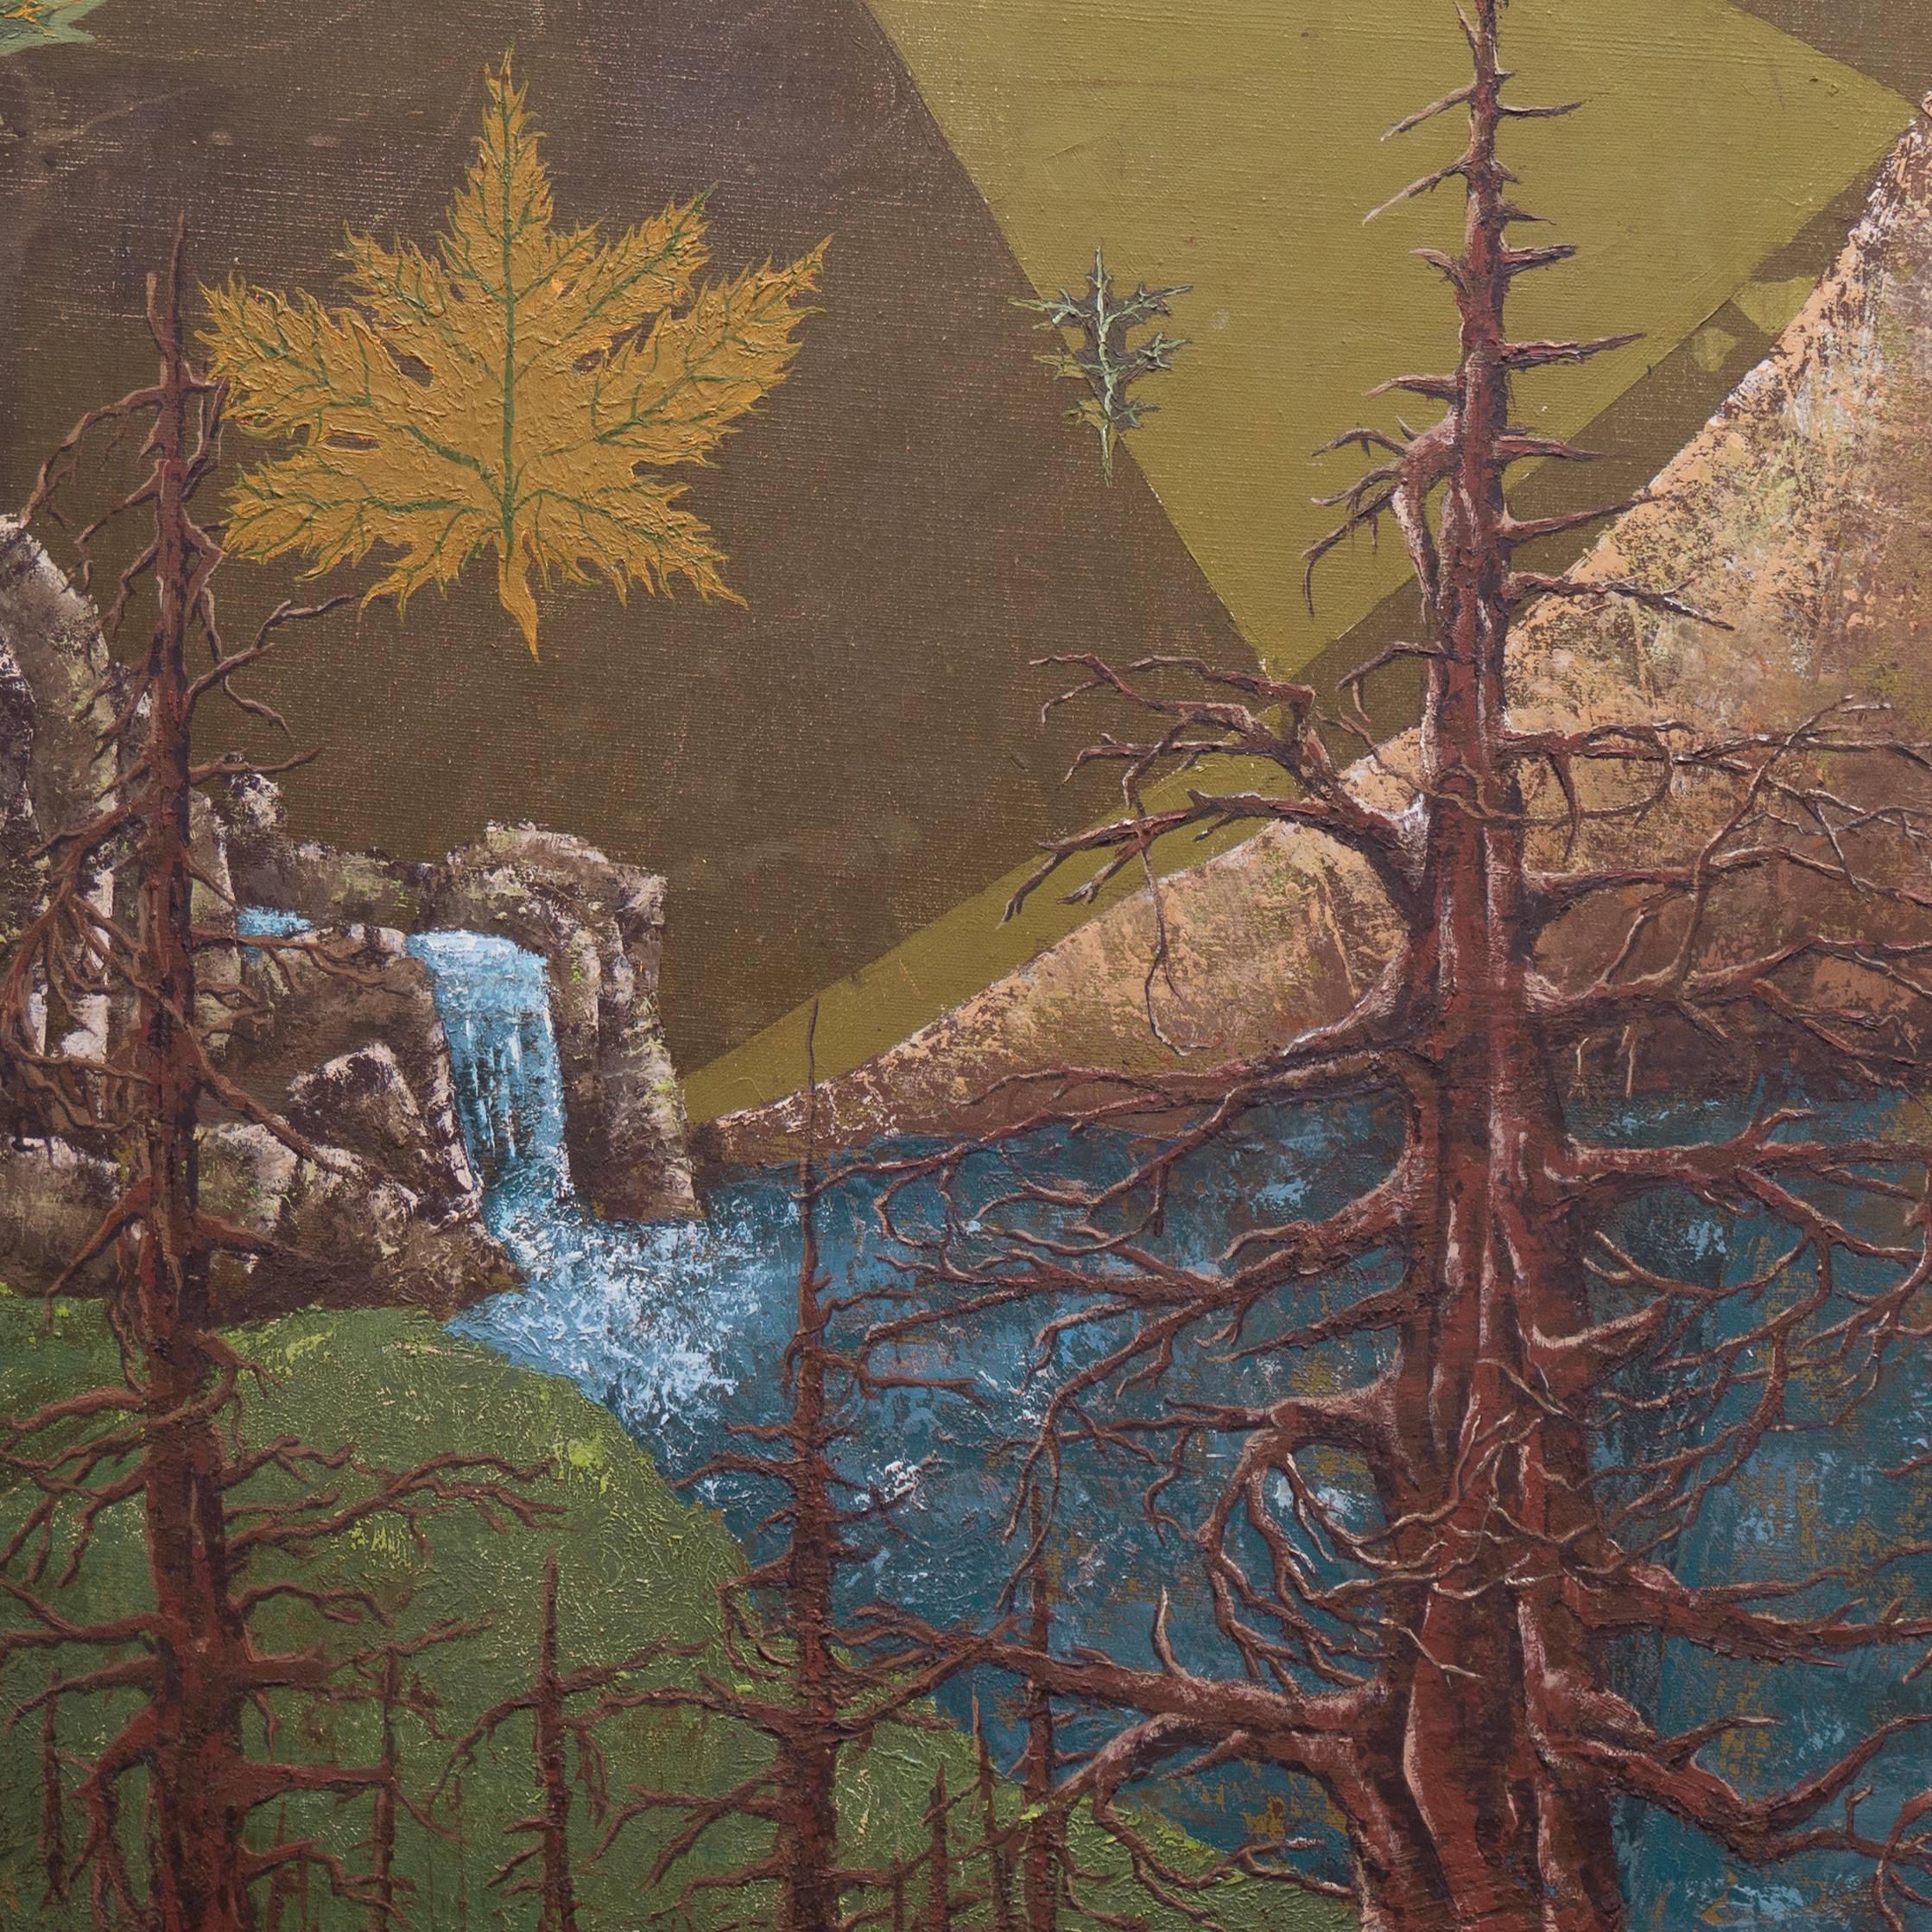 Surreal Mountain Lake Landscape, Falling Autumn Leaves - Surrealist Painting by O. Connor